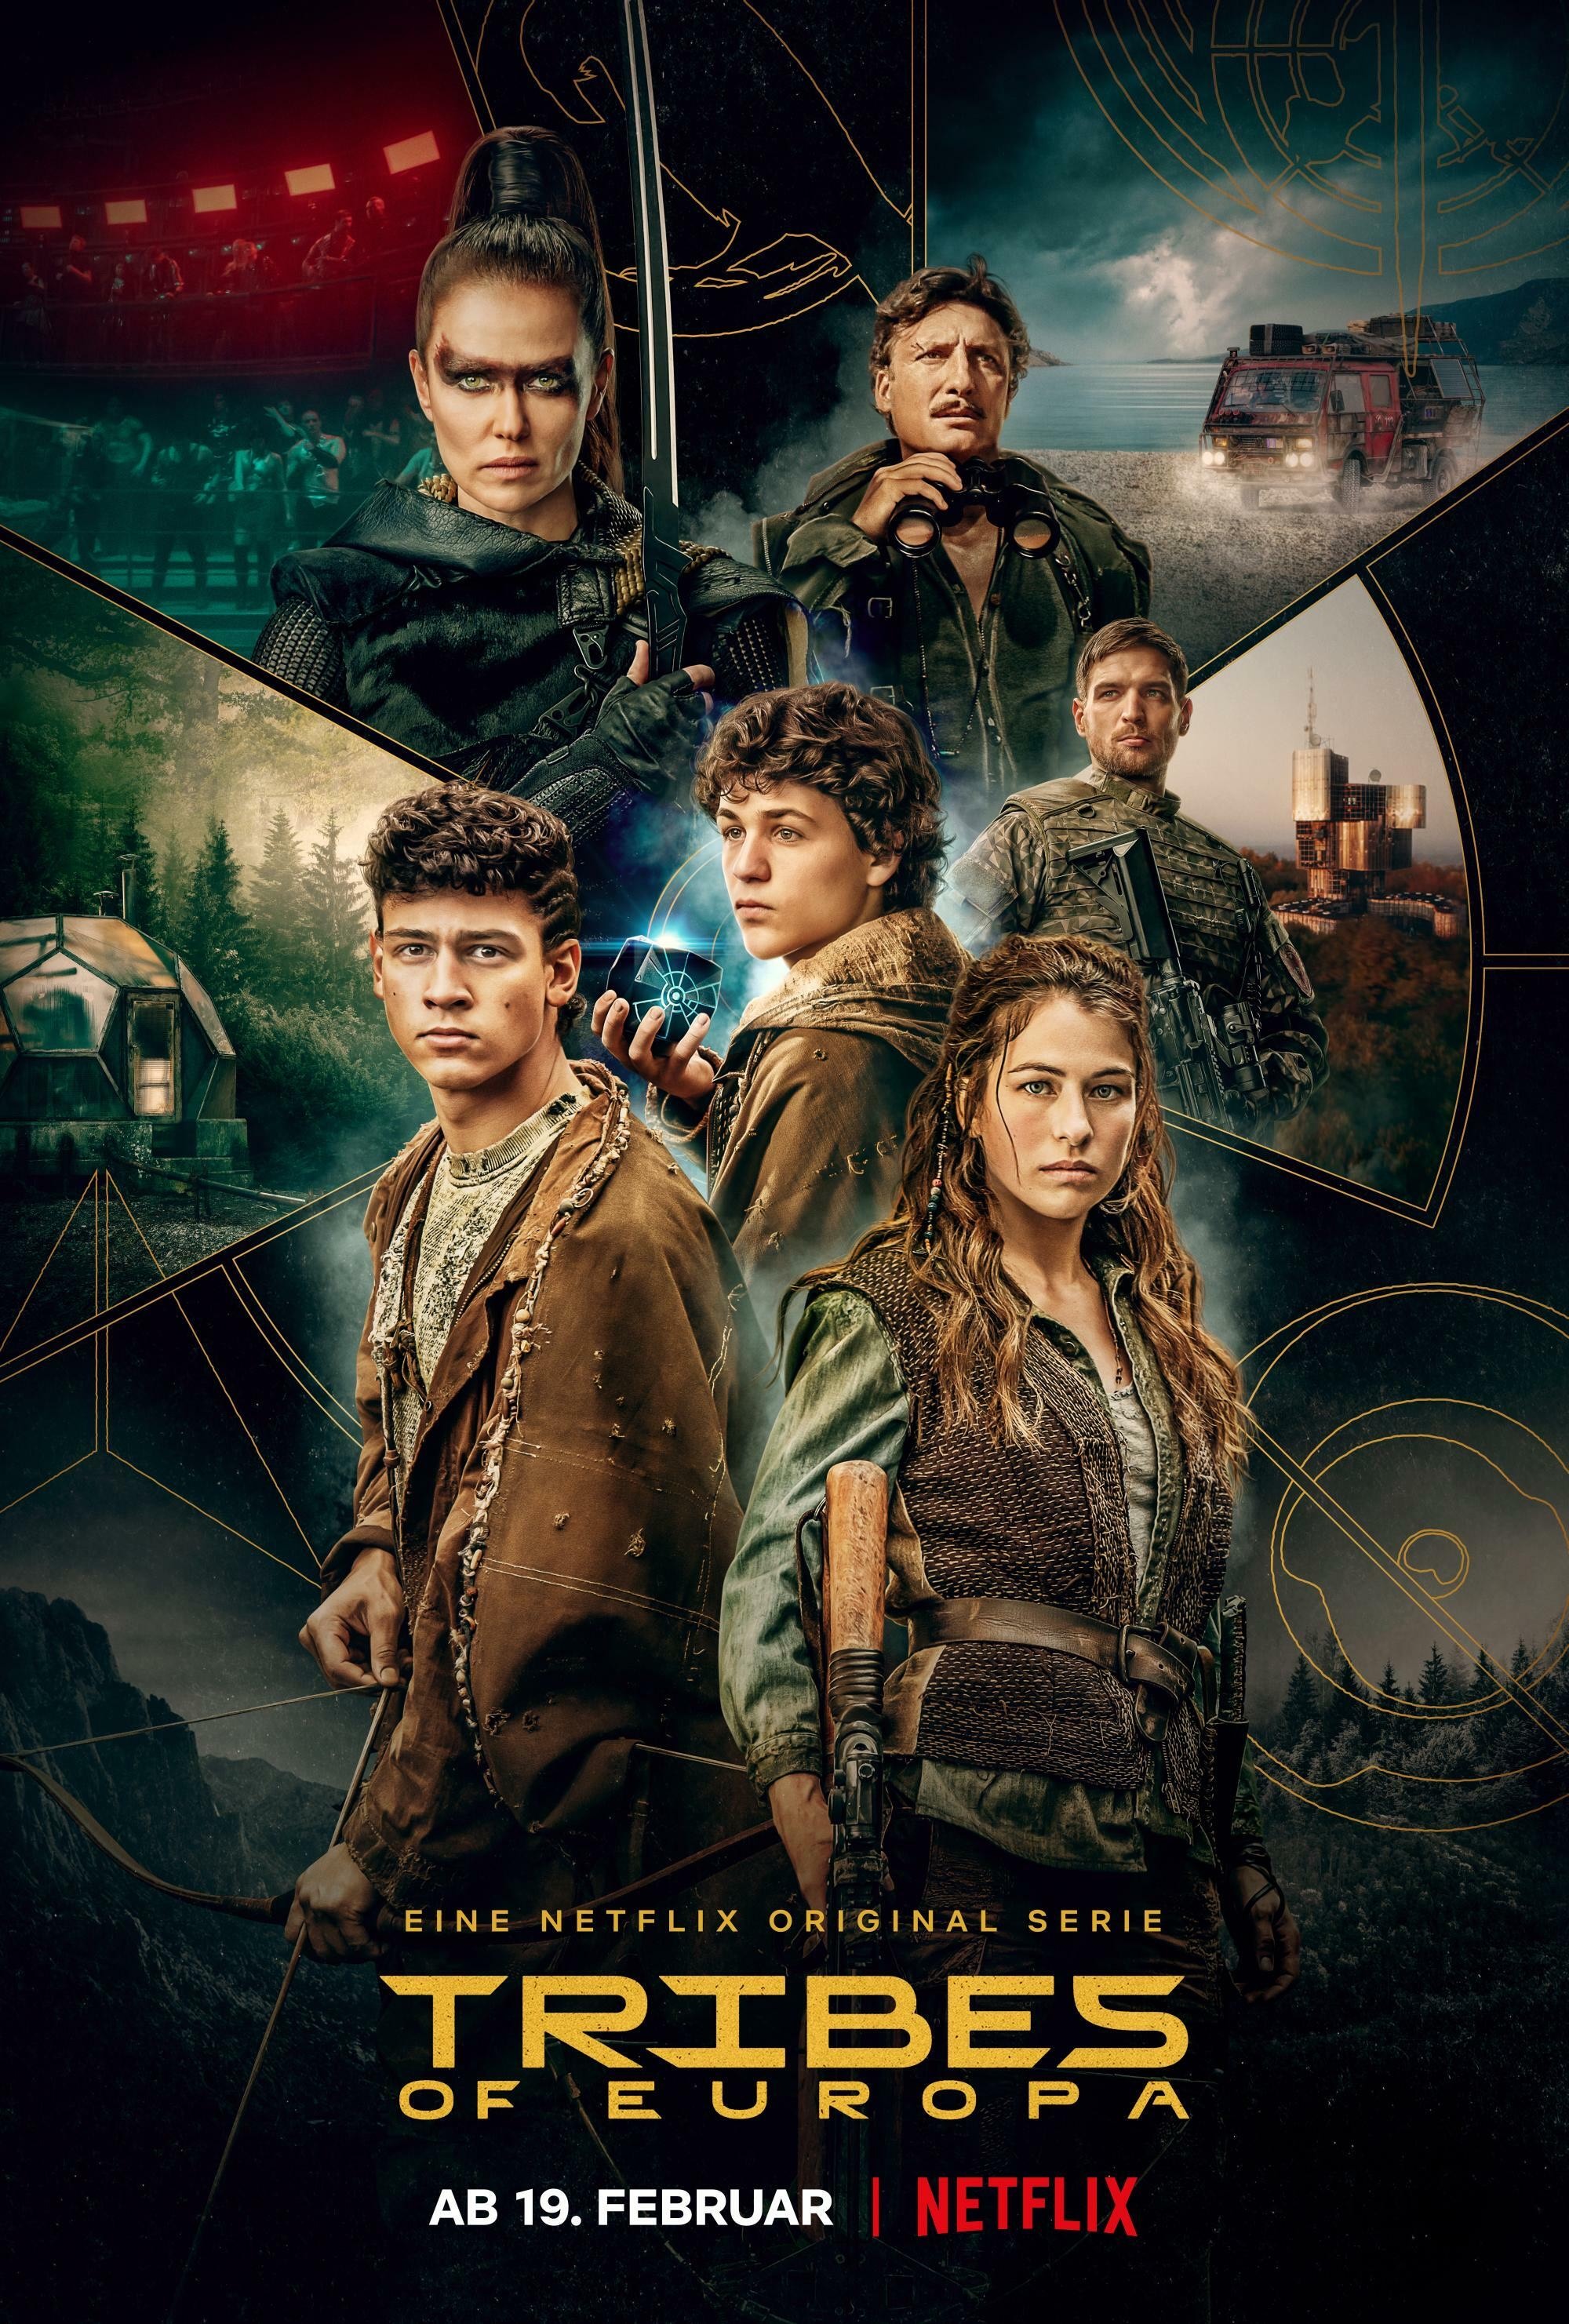 Netflix launches German Original Series Tribes of Europa on February 19,  2021 - About Netflix